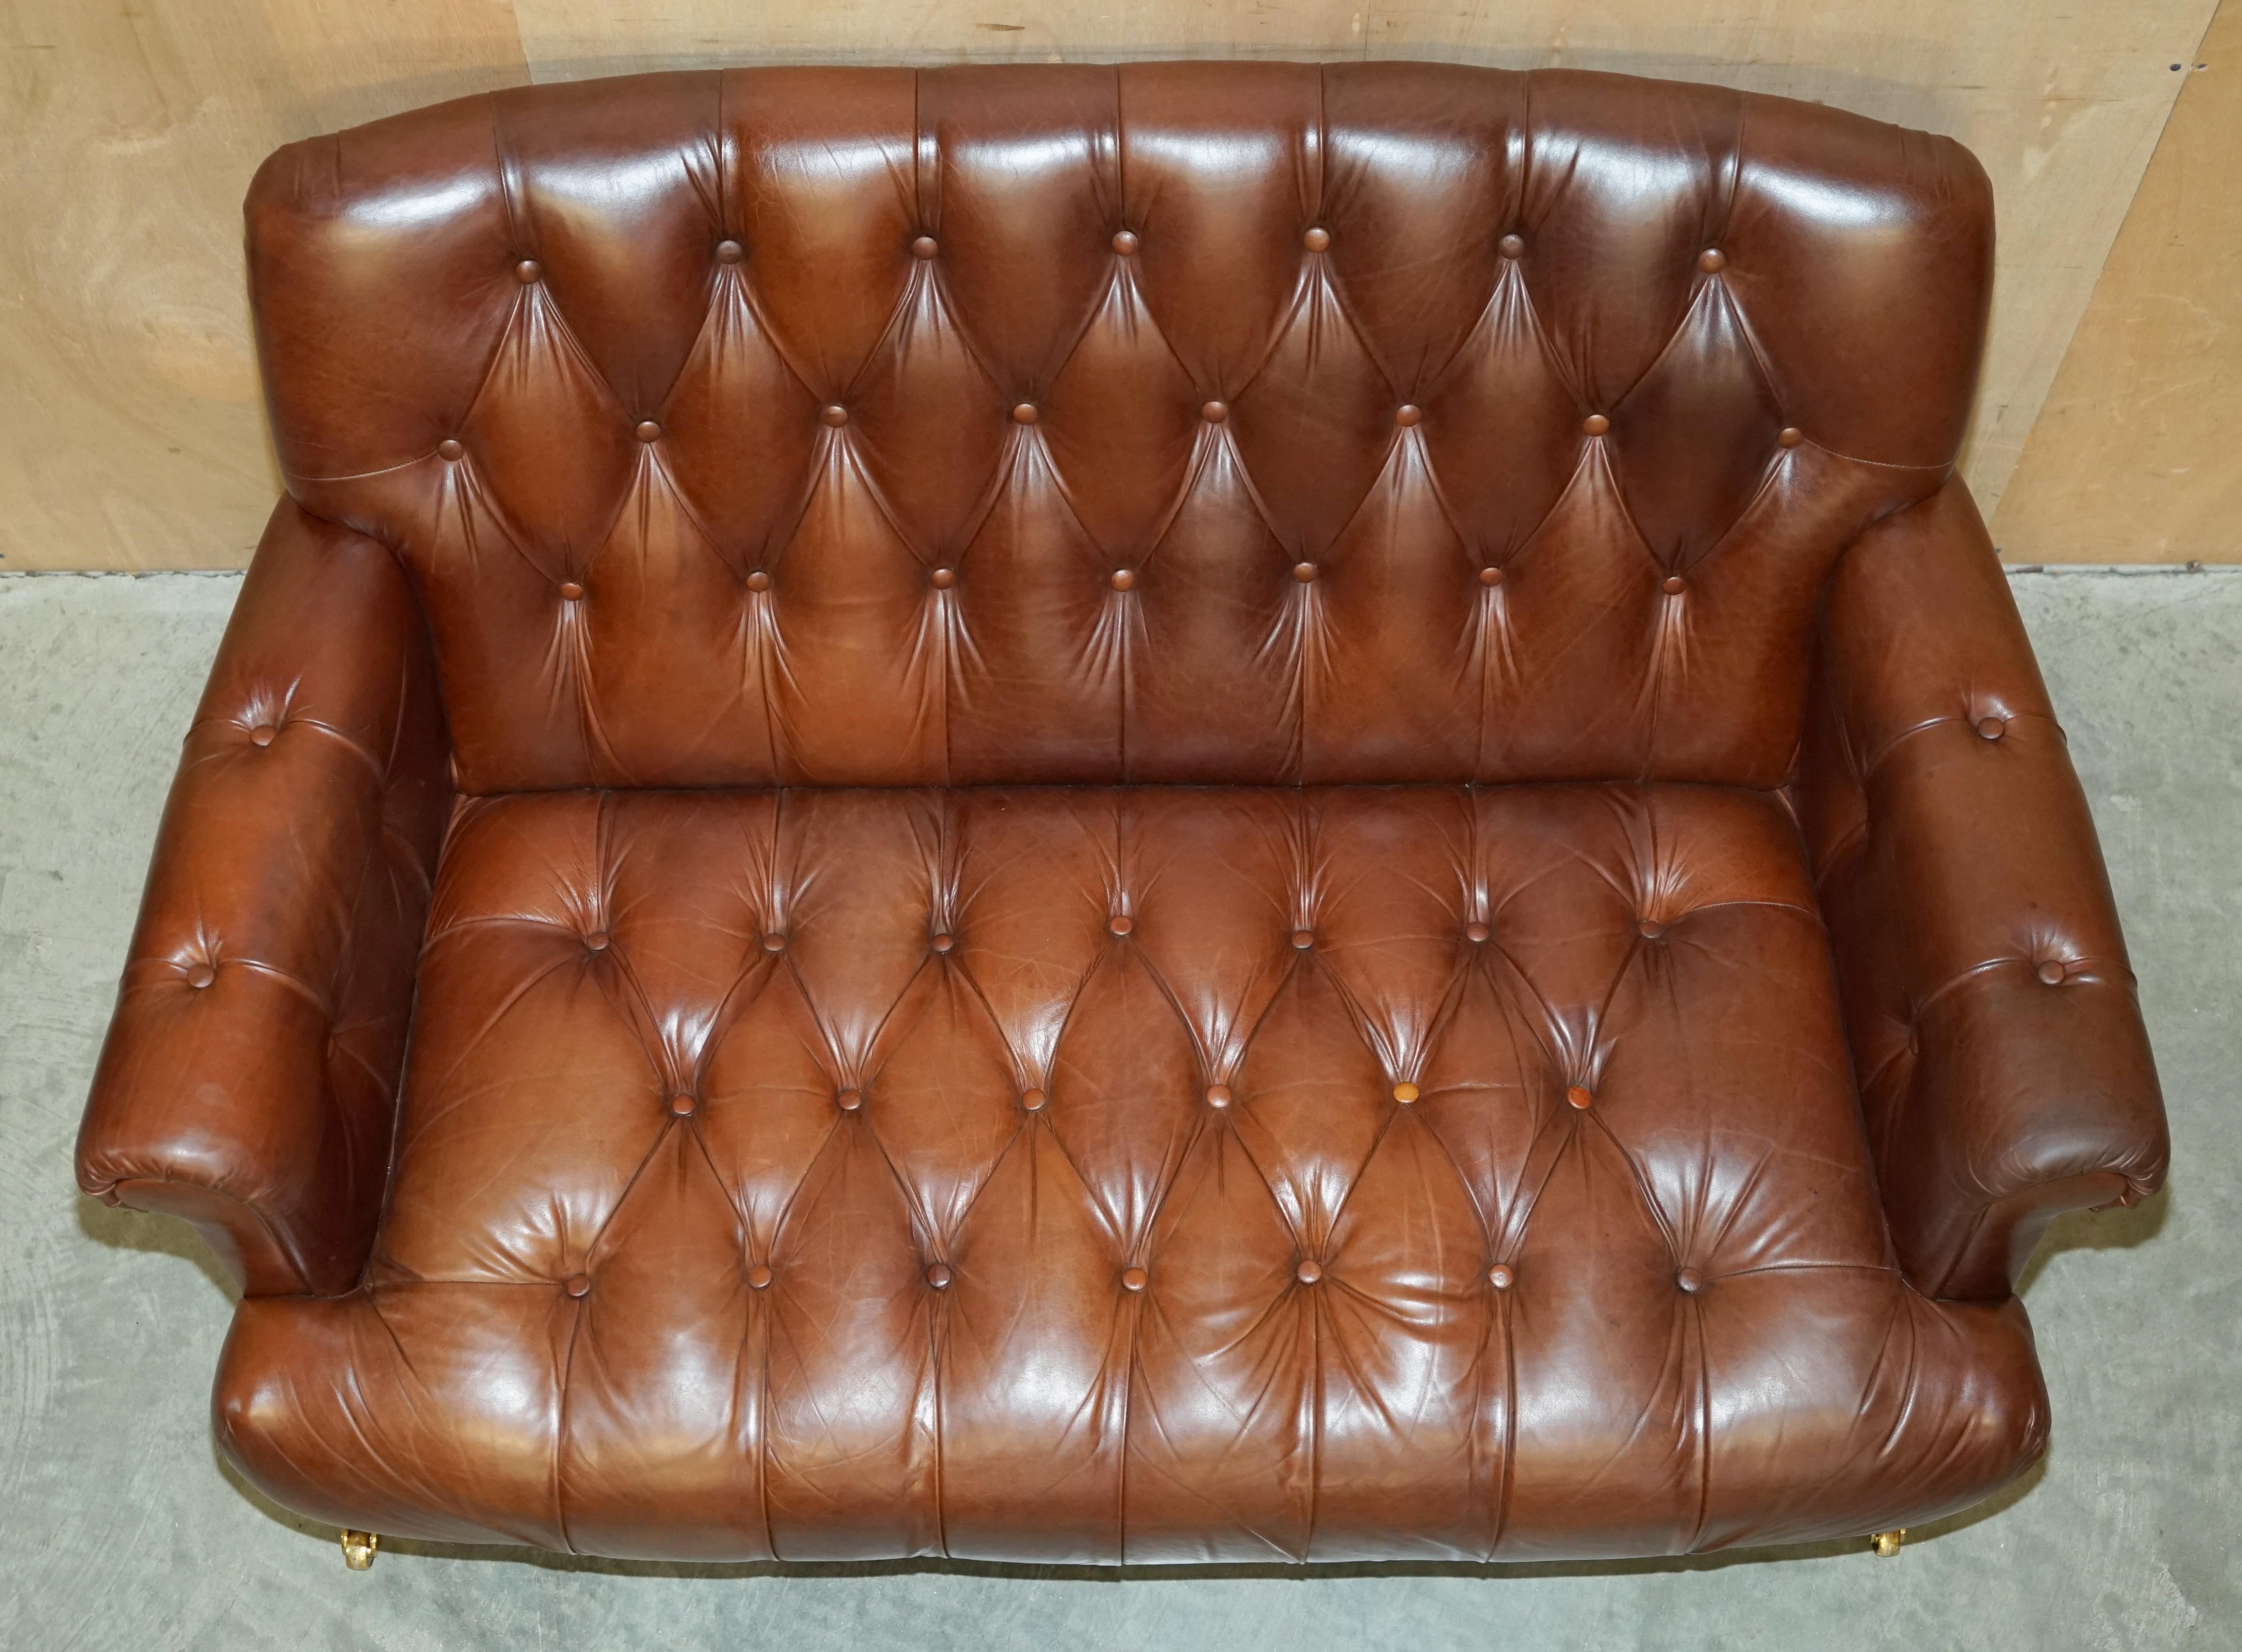 FiNE CHESTNUT BROWN LEATHER LAUREN ASHLEY CHESTERFIELD TWO SEAT LIBRARY SOFa For Sale 5